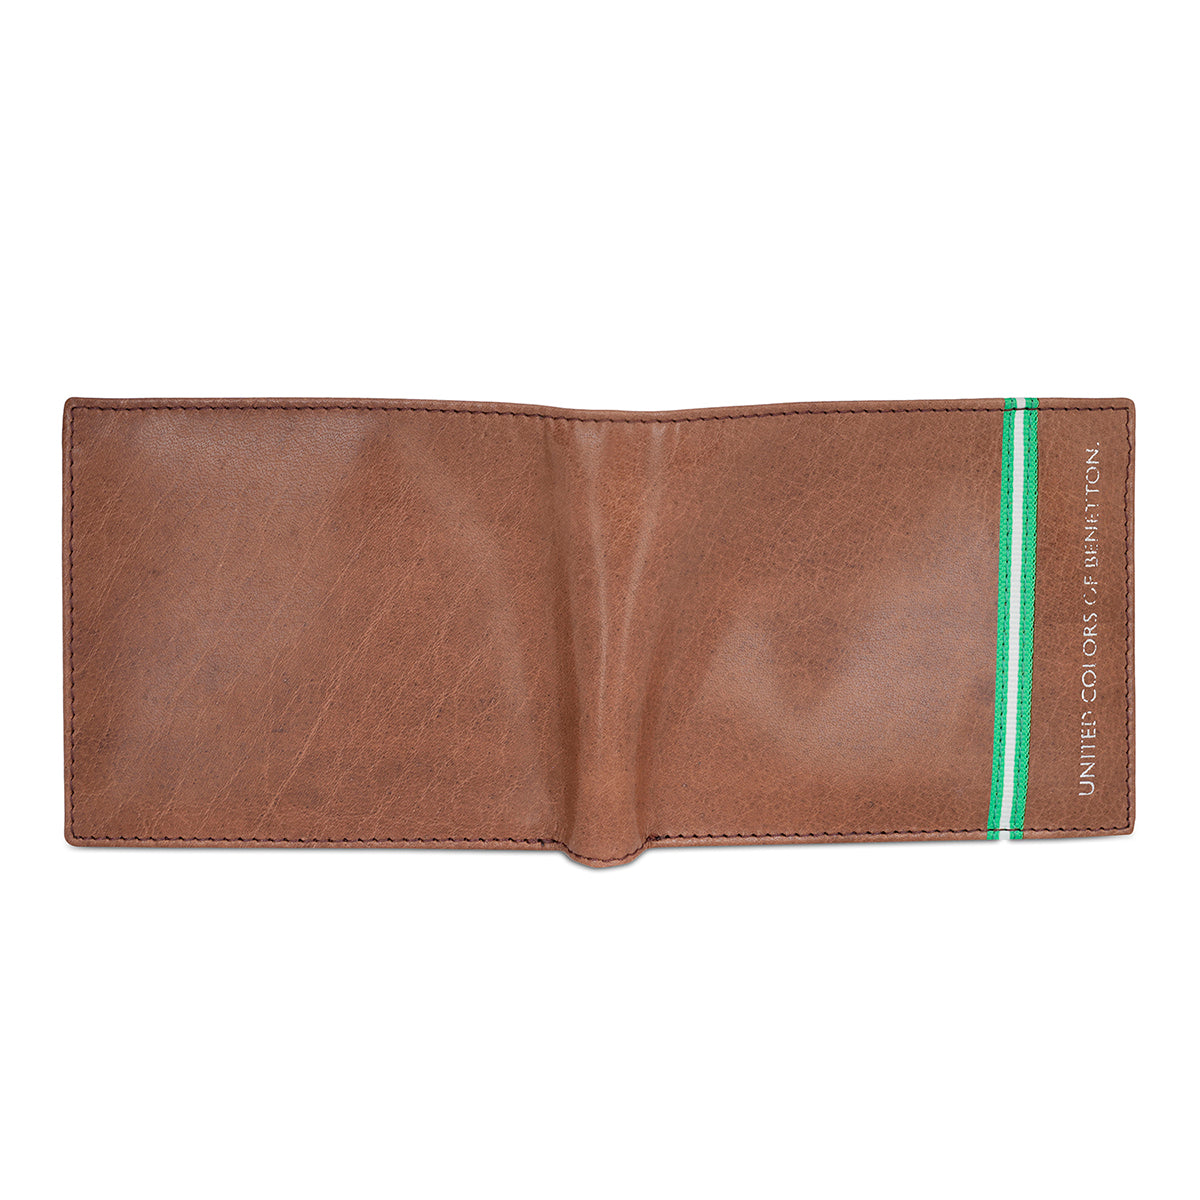 United Colors of Benetton Natalio Passcase Wallet Brown